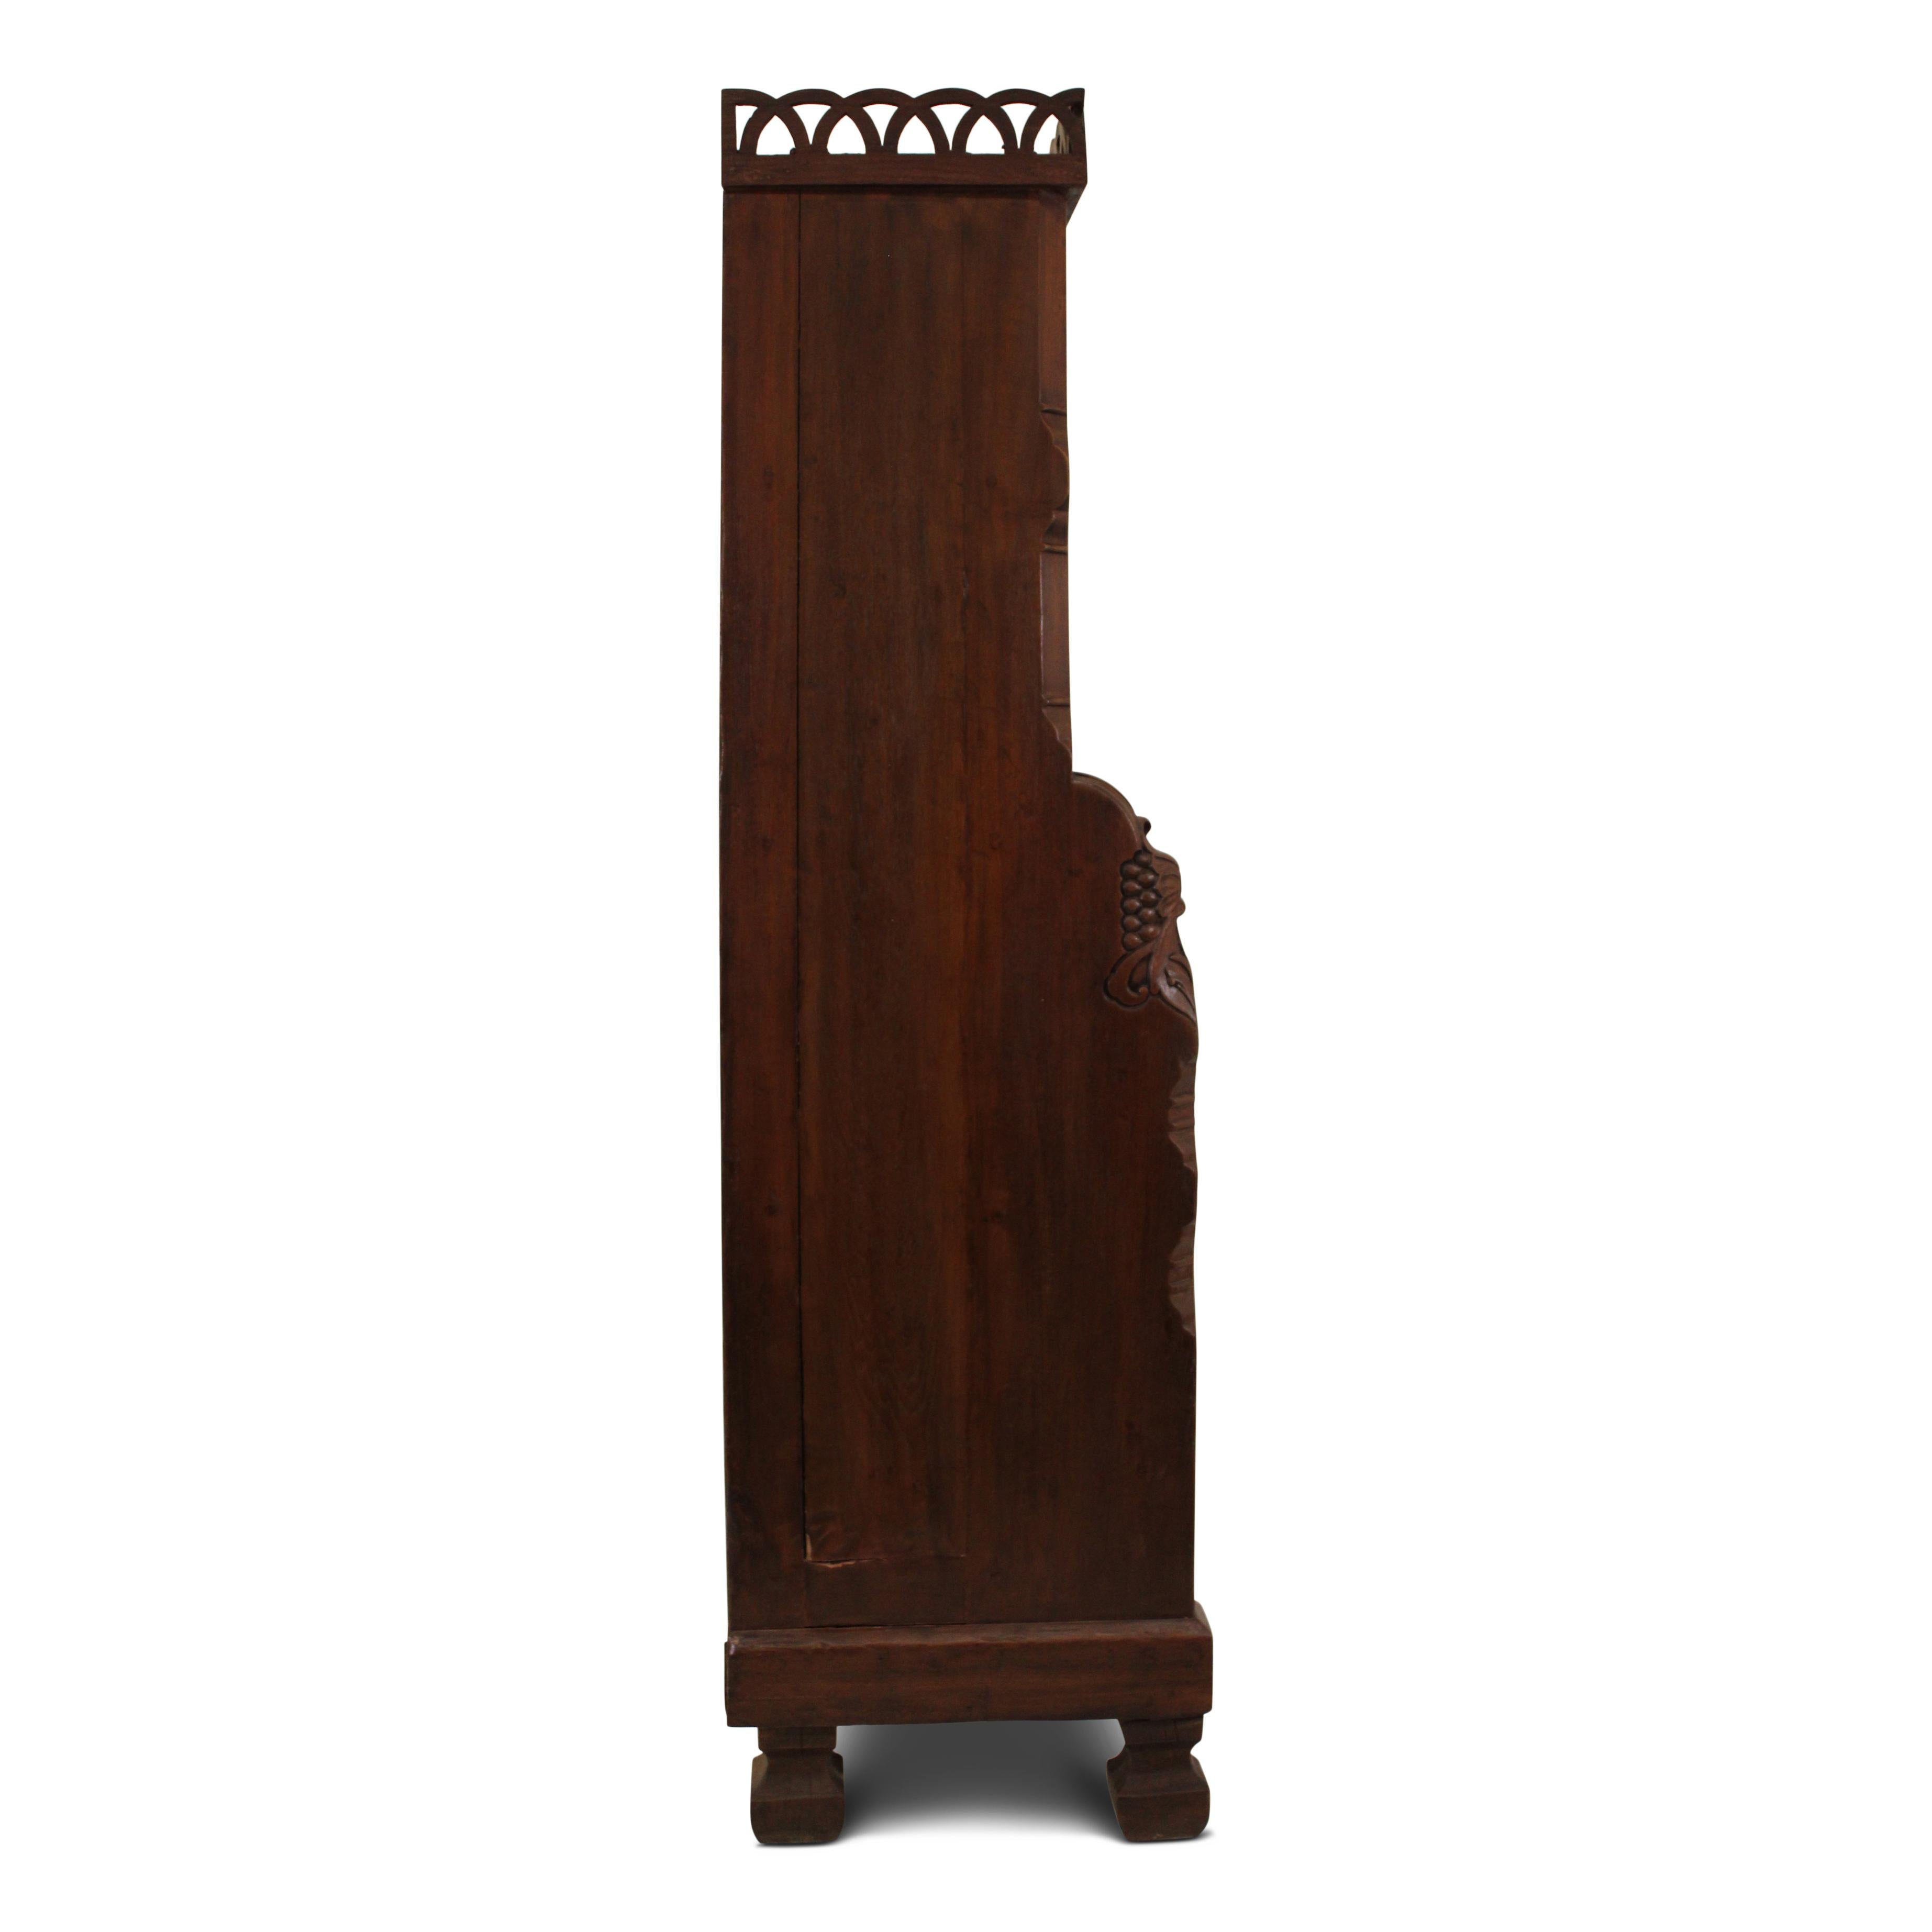 Anglo-Indian Teak Bookcase From an Indian Palace